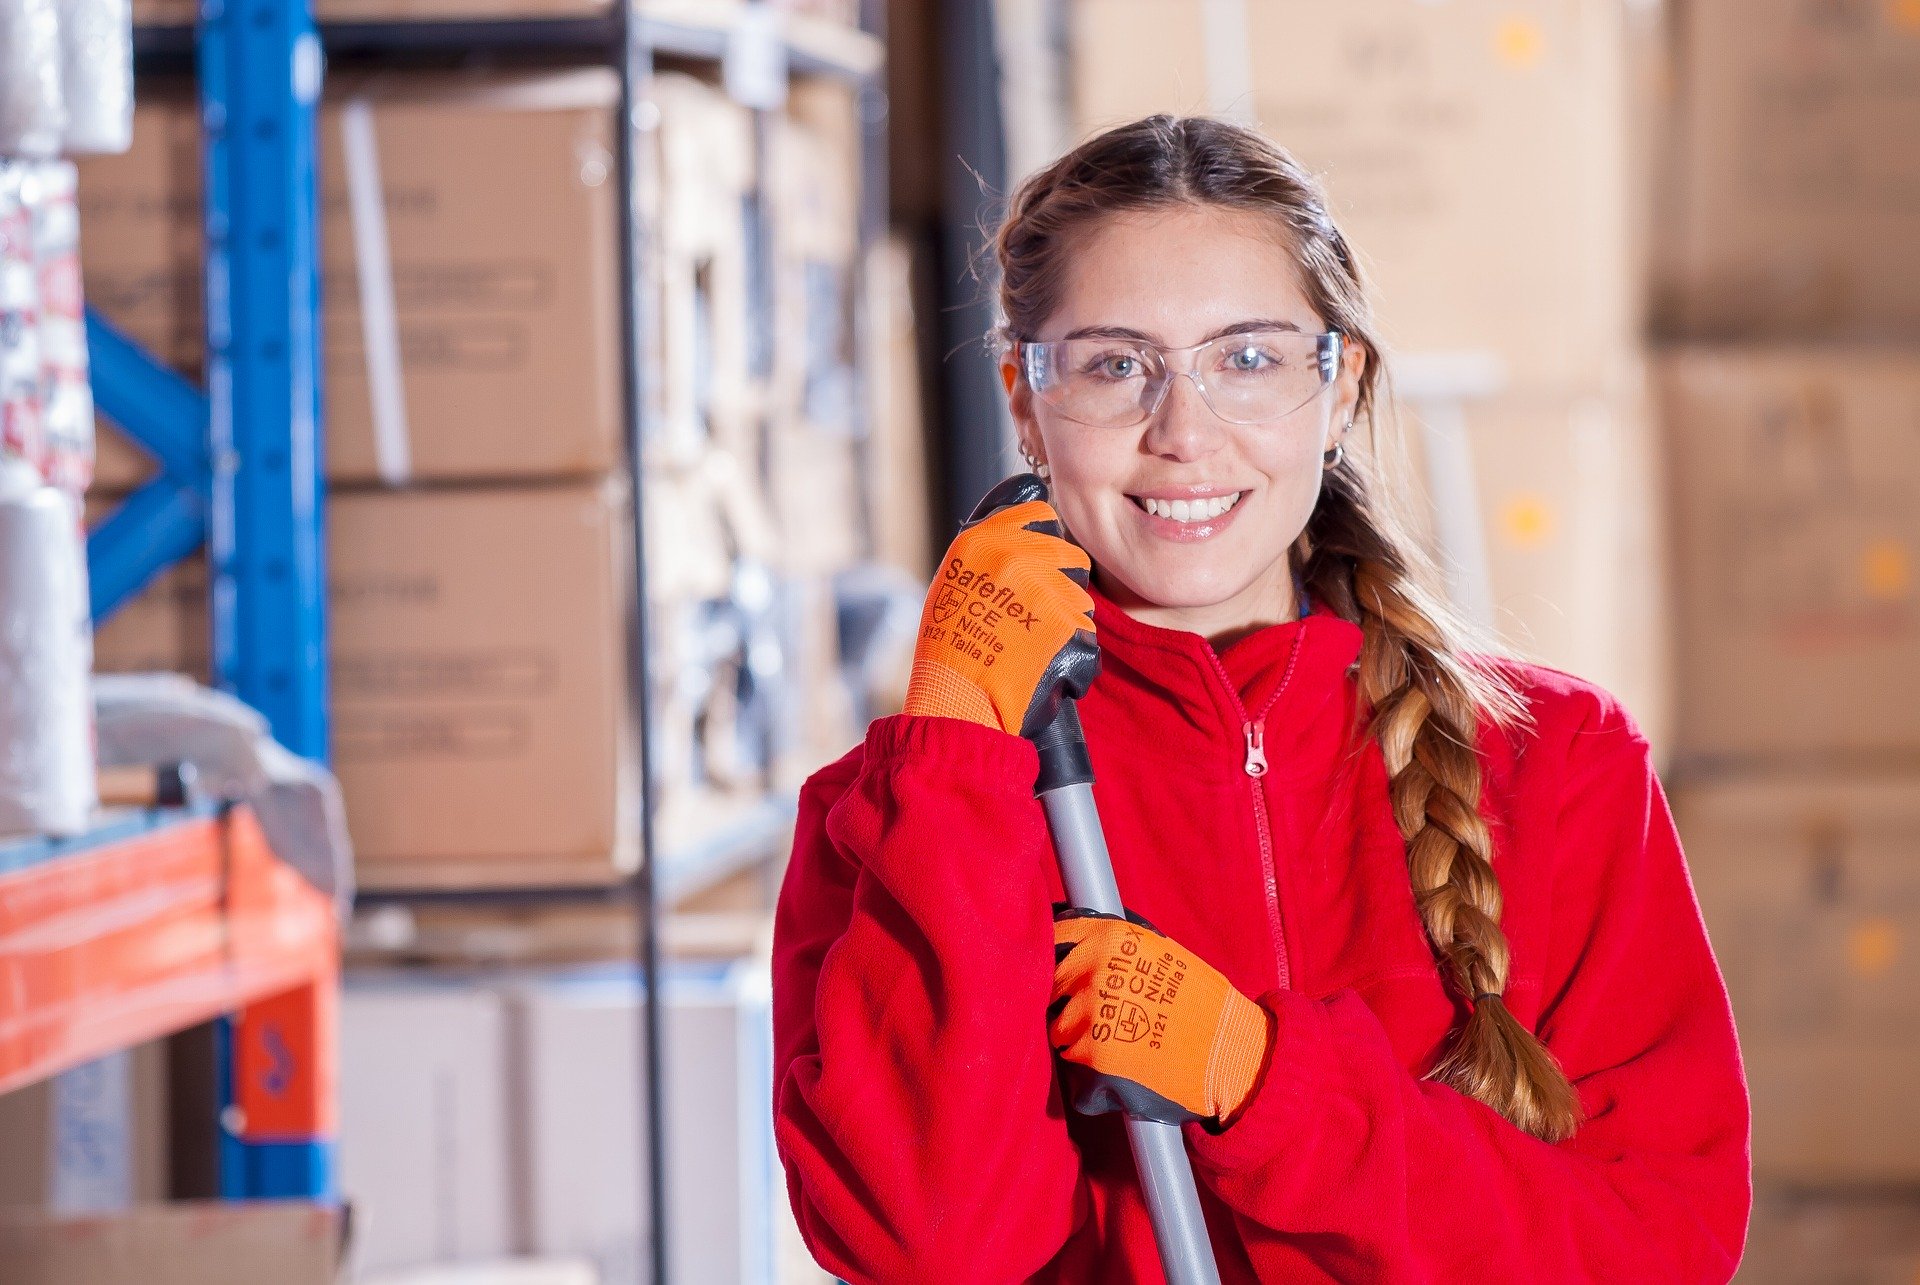 Friendly manufacturing specialist smiling at camera